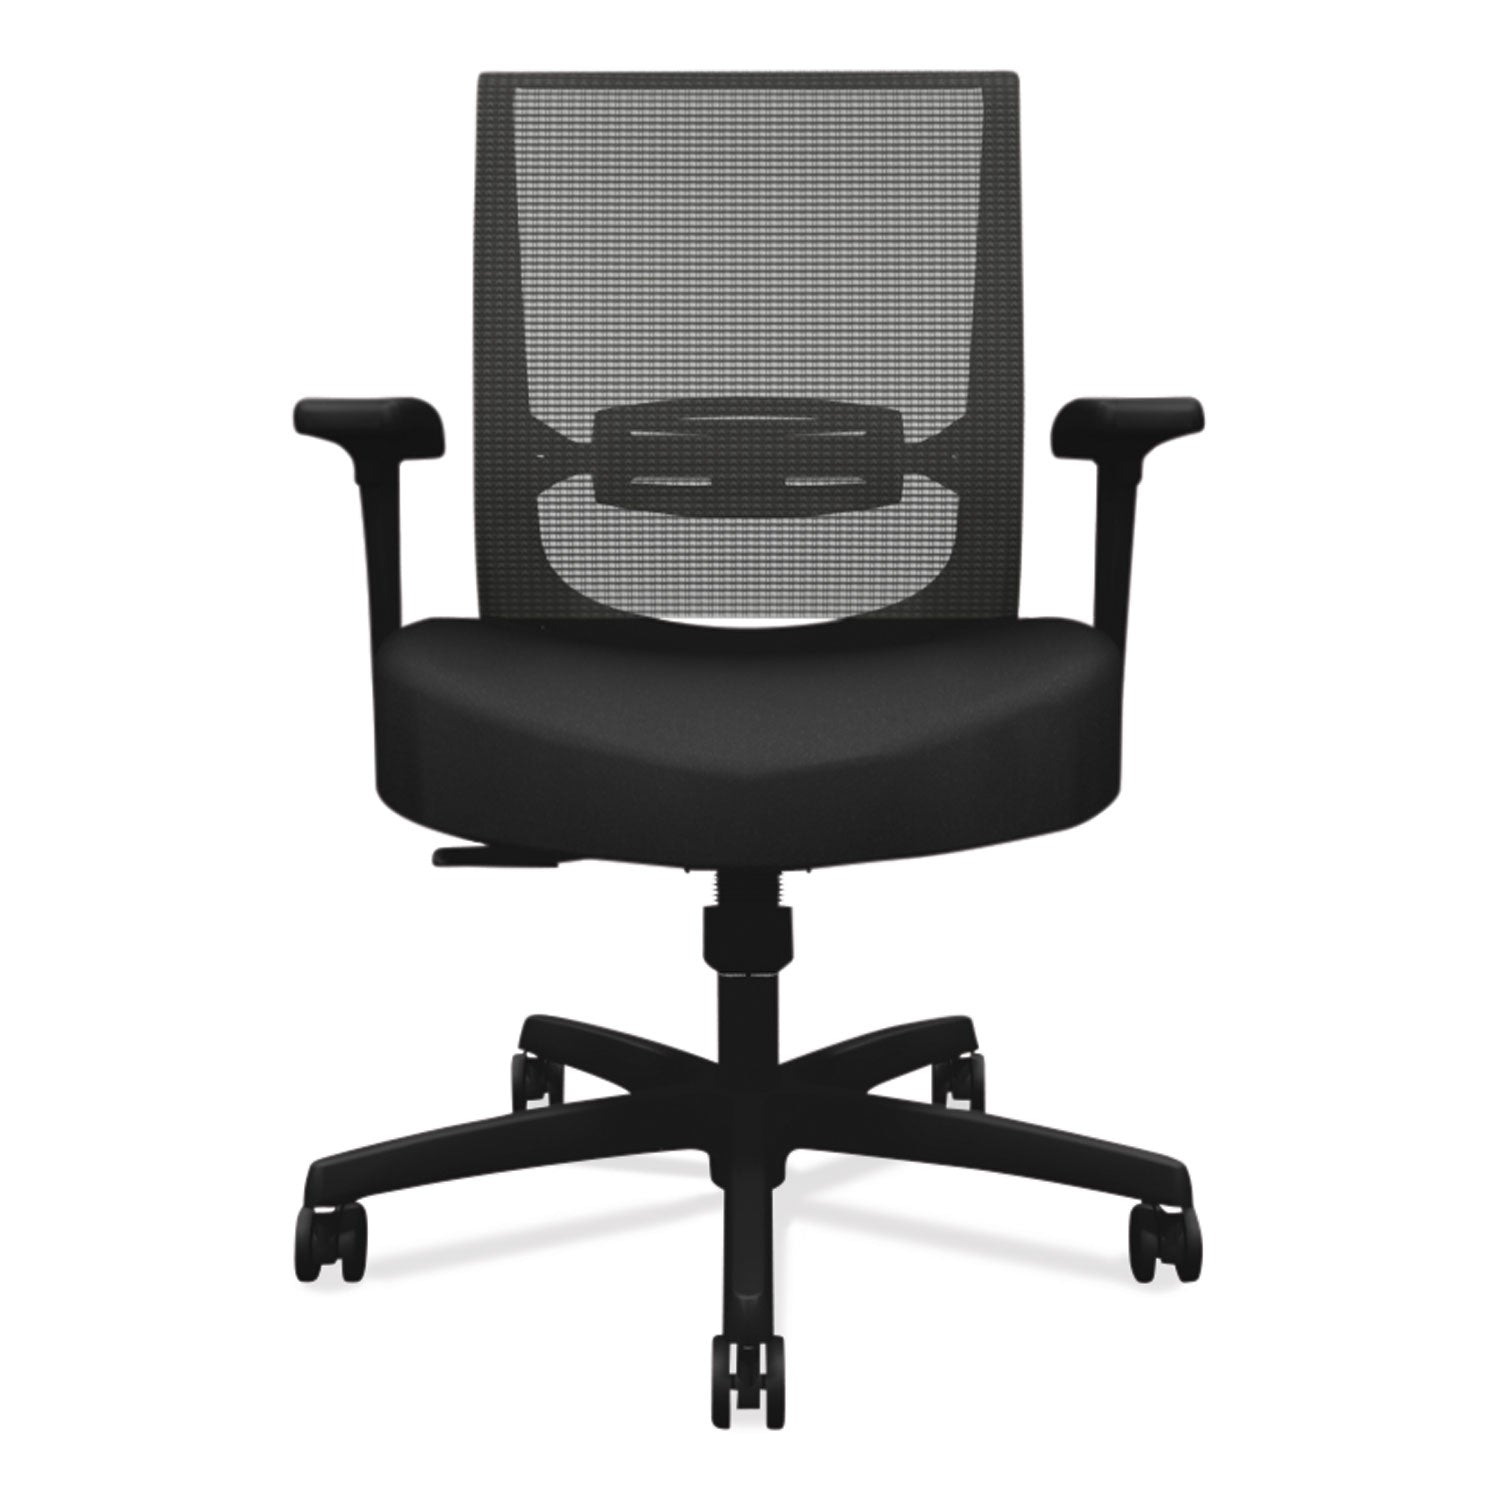 convergence-mid-back-task-chair-swivel-tilt-supports-up-to-275-lb-1575-to-2013-seat-height-black_honcms1aaccf10 - 2